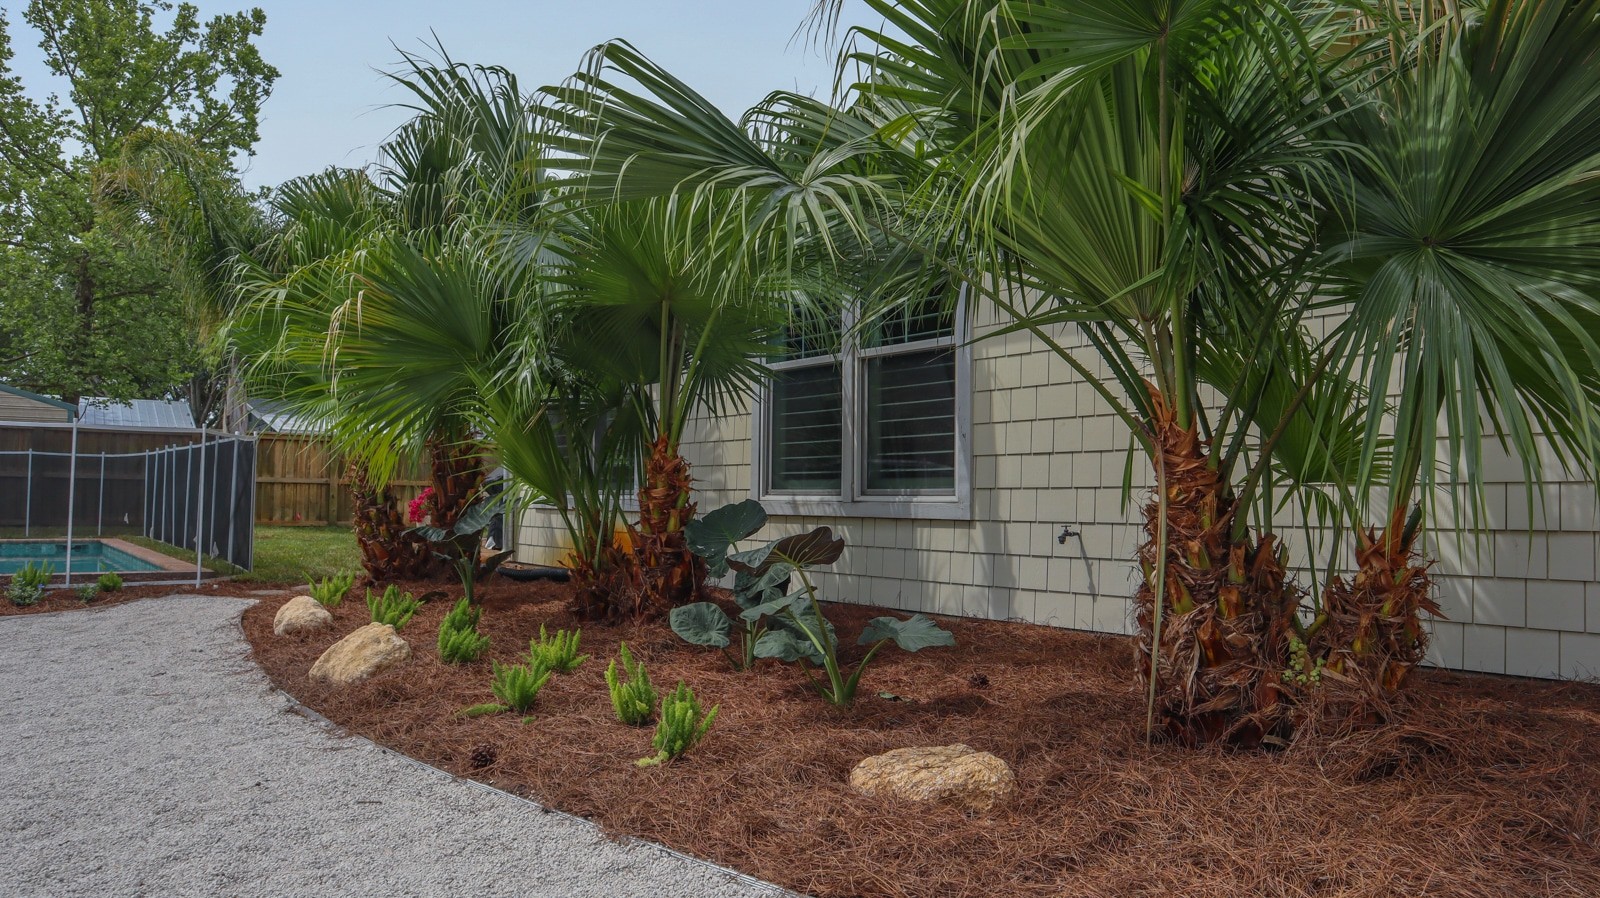 Pool Landscaping Ideas - Pearson residence - Atlantic Beach FL swimming pool landscaping design and hardscapes by Rockaway